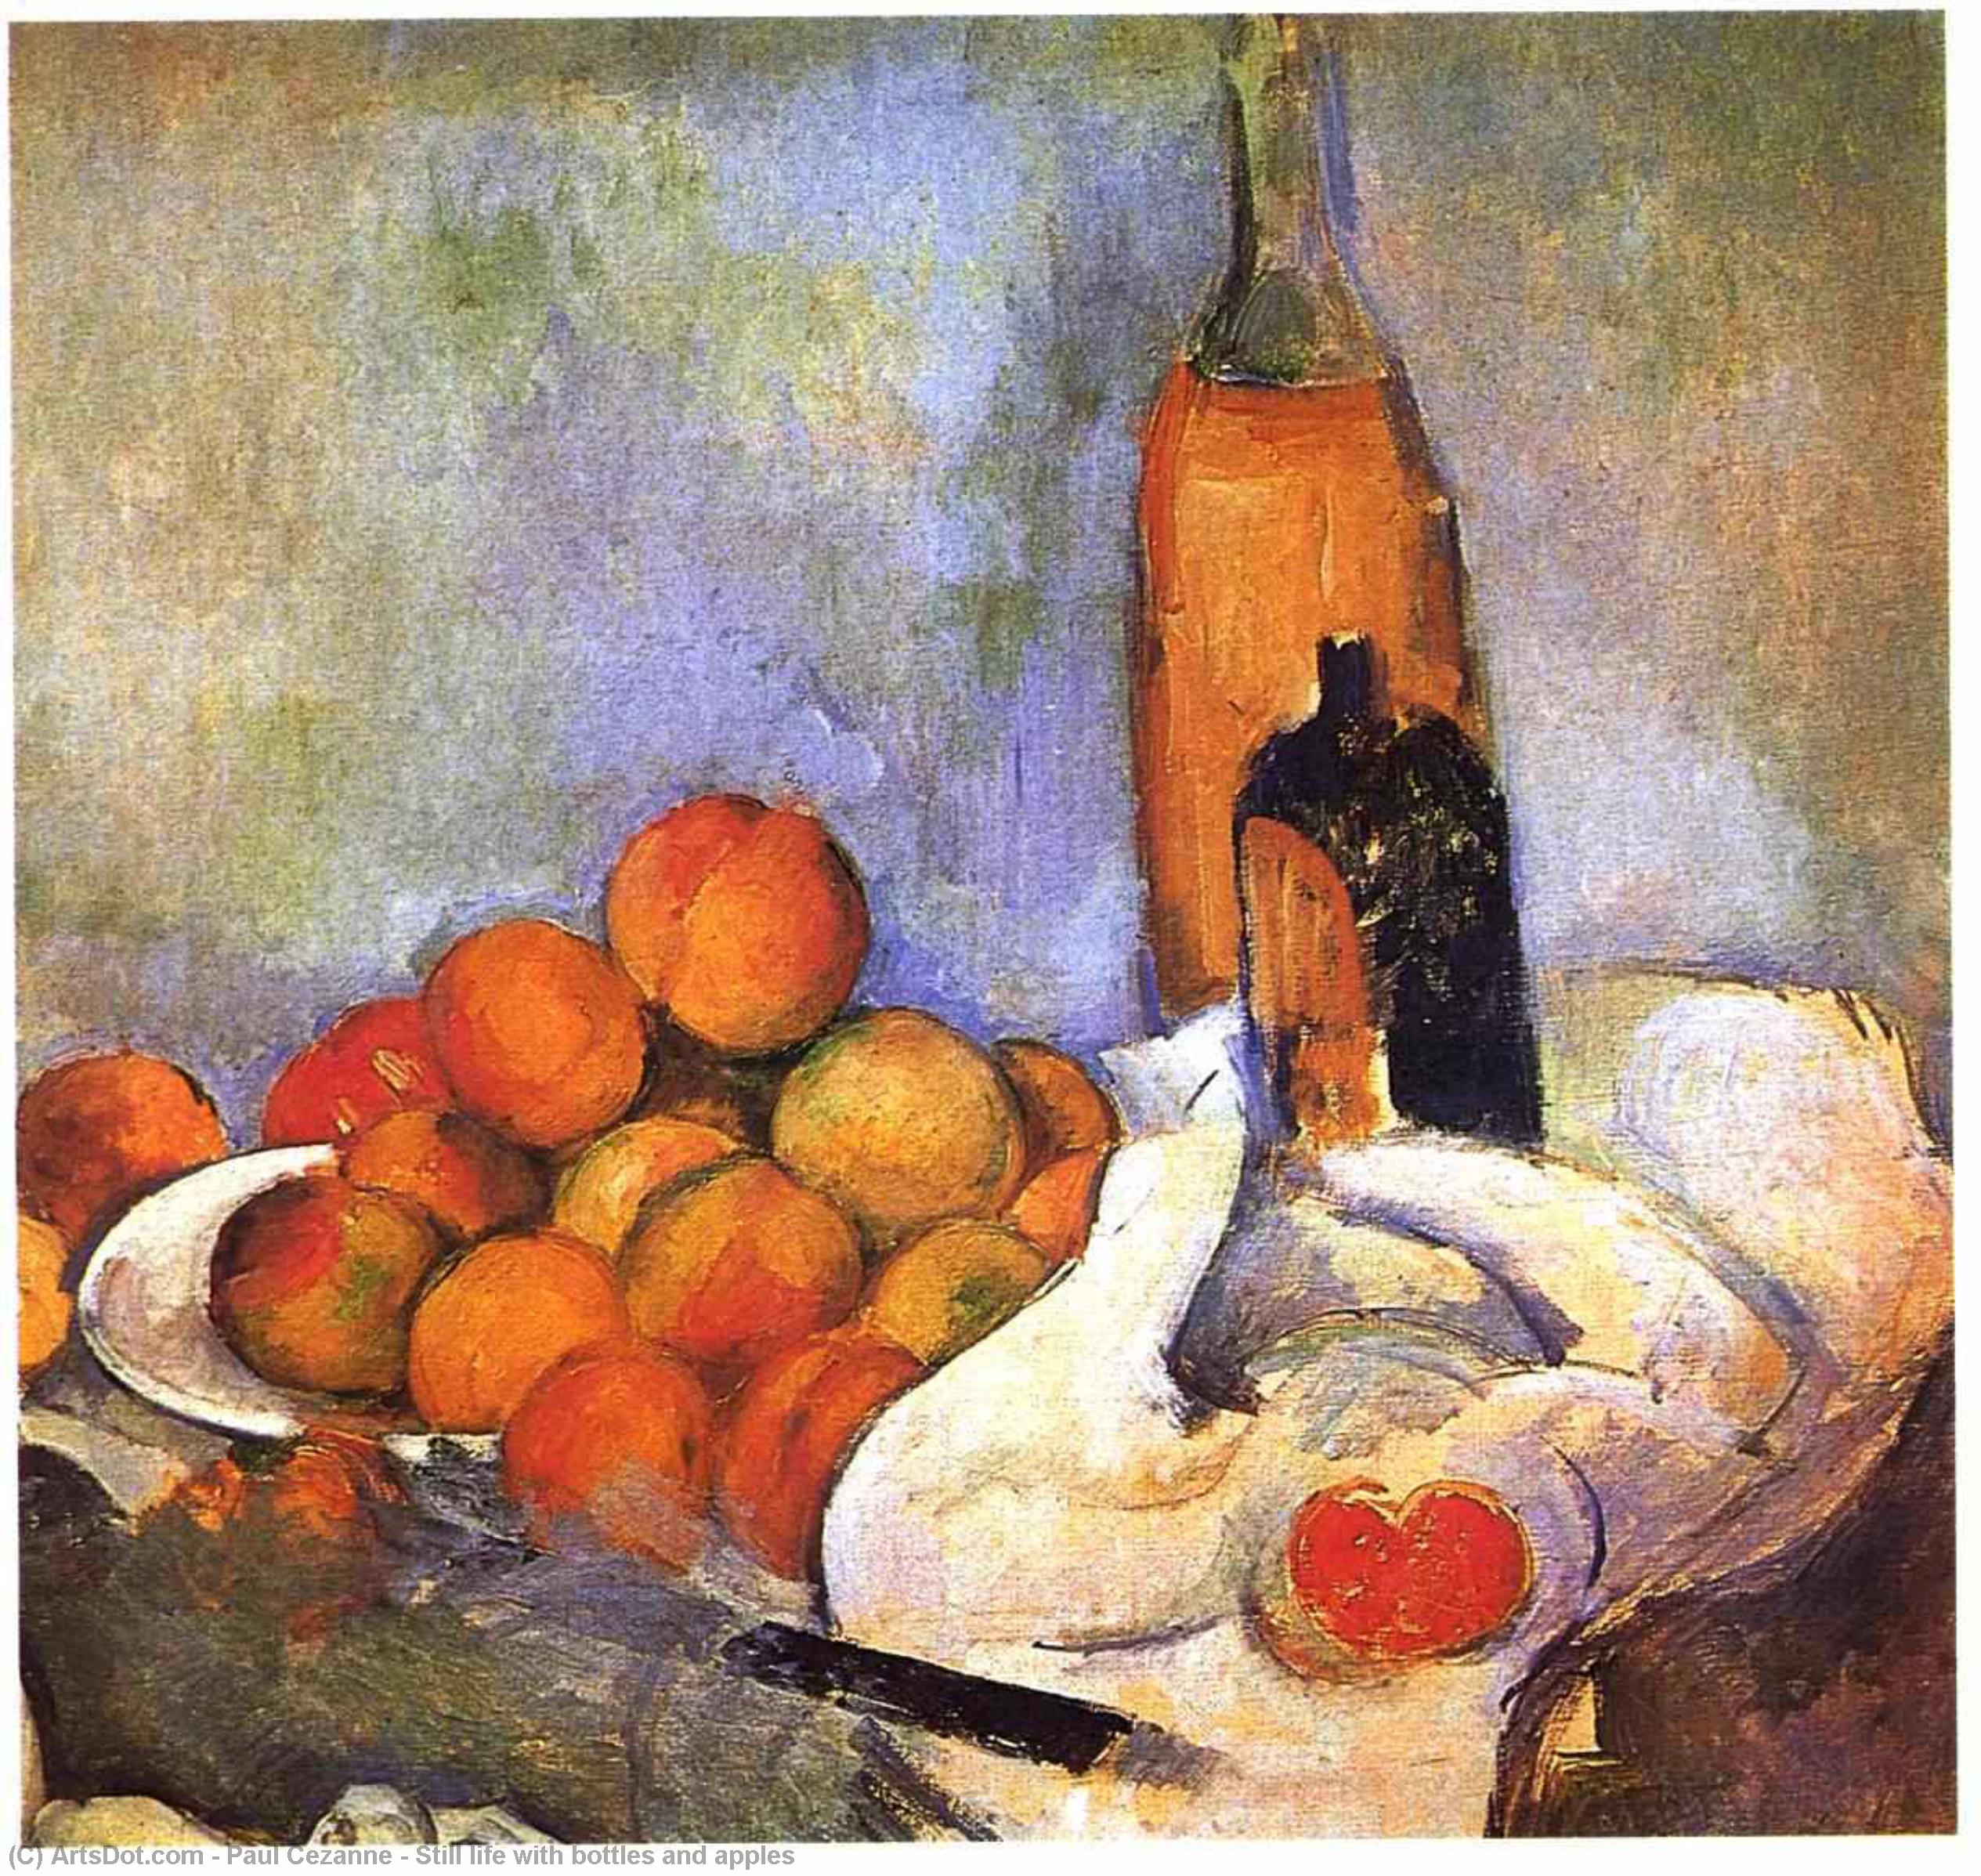 WikiOO.org - Encyclopedia of Fine Arts - Lukisan, Artwork Paul Cezanne - Still life with bottles and apples